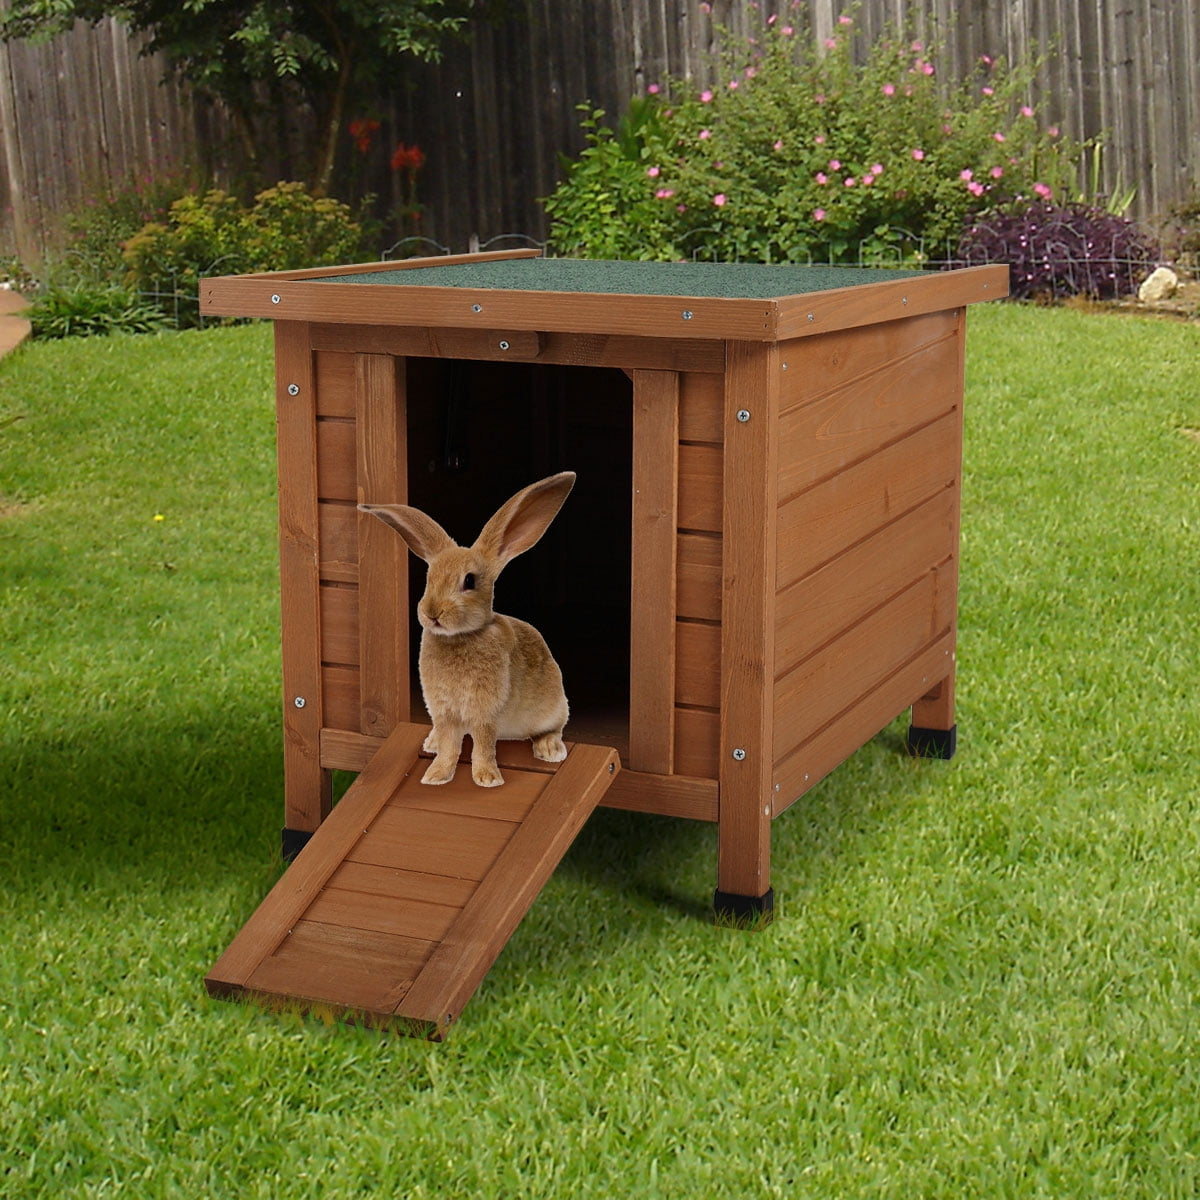 Veryke Rabbit Hutch, Wooden Rabbit Cage, Pet House Bunny Shelter with ...